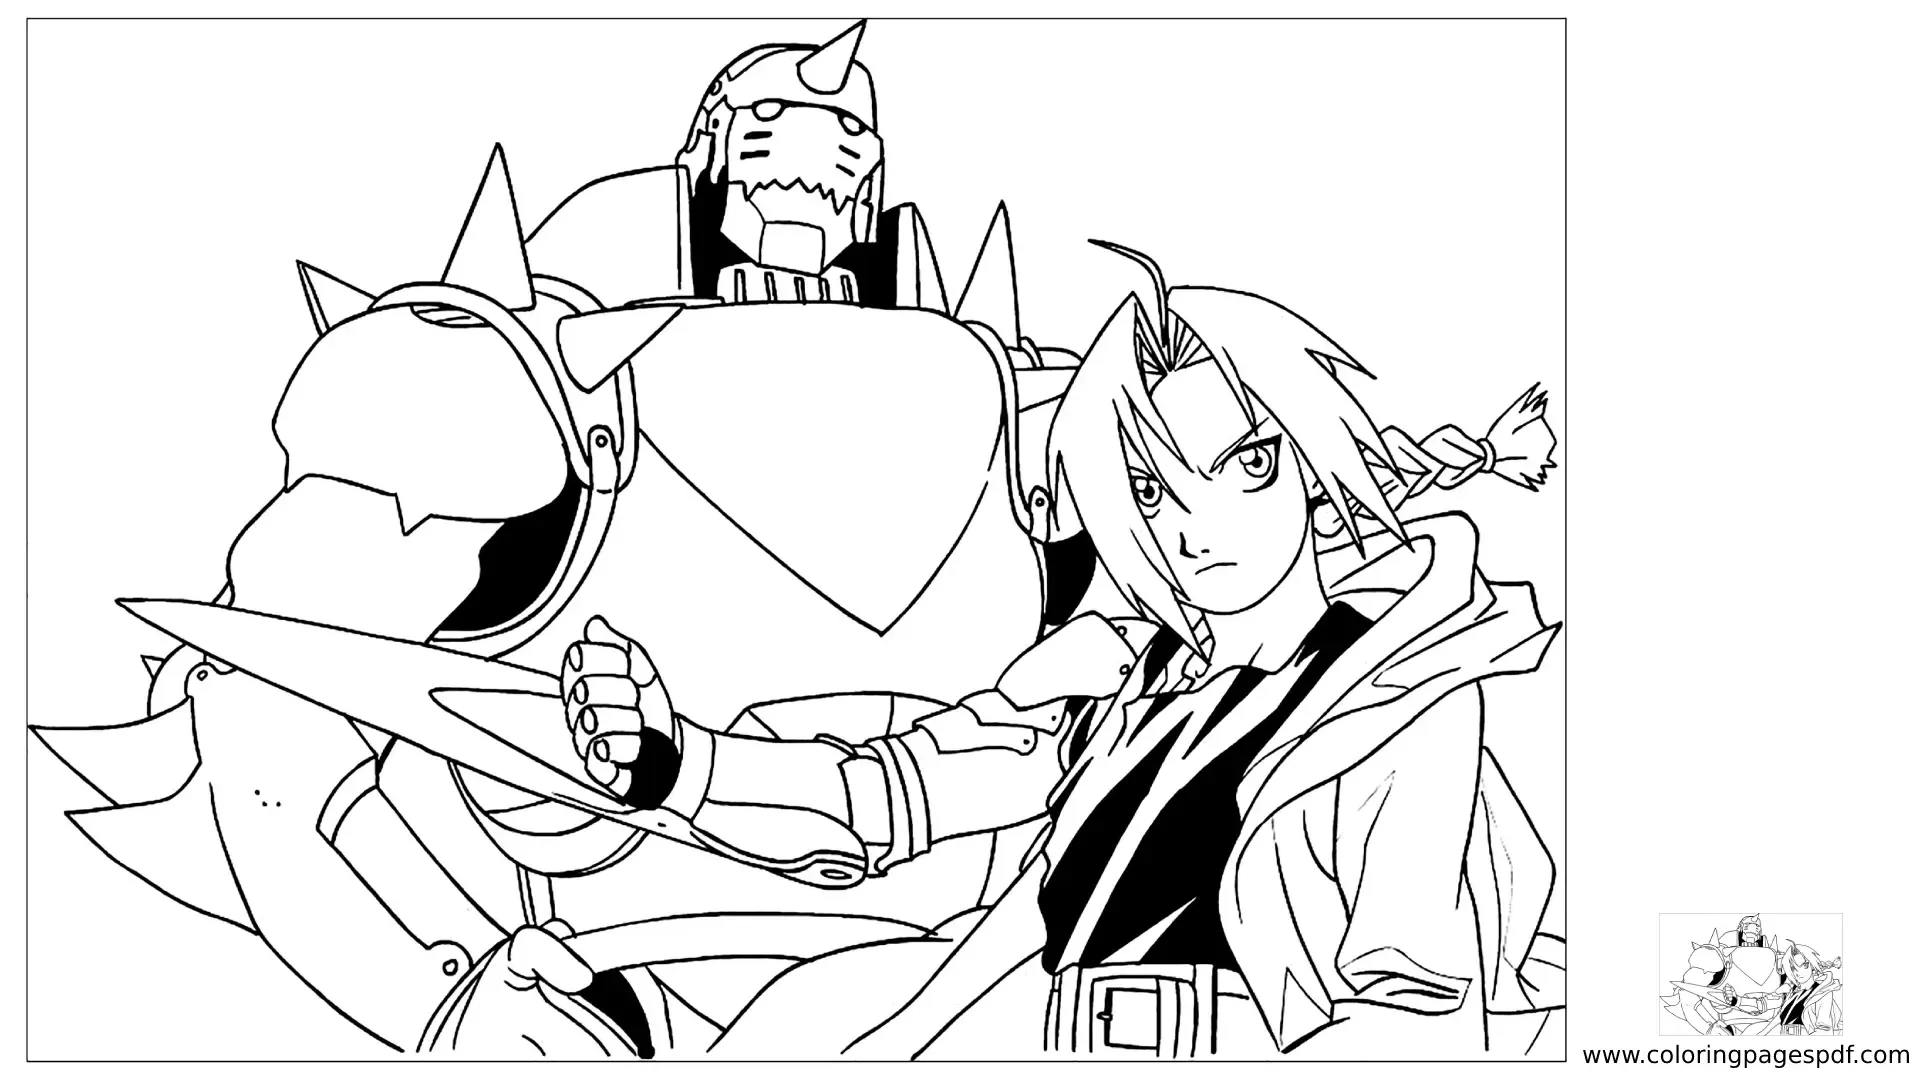 Coloring Page Of Edward And Alphonse (Full Metal Alchemist)